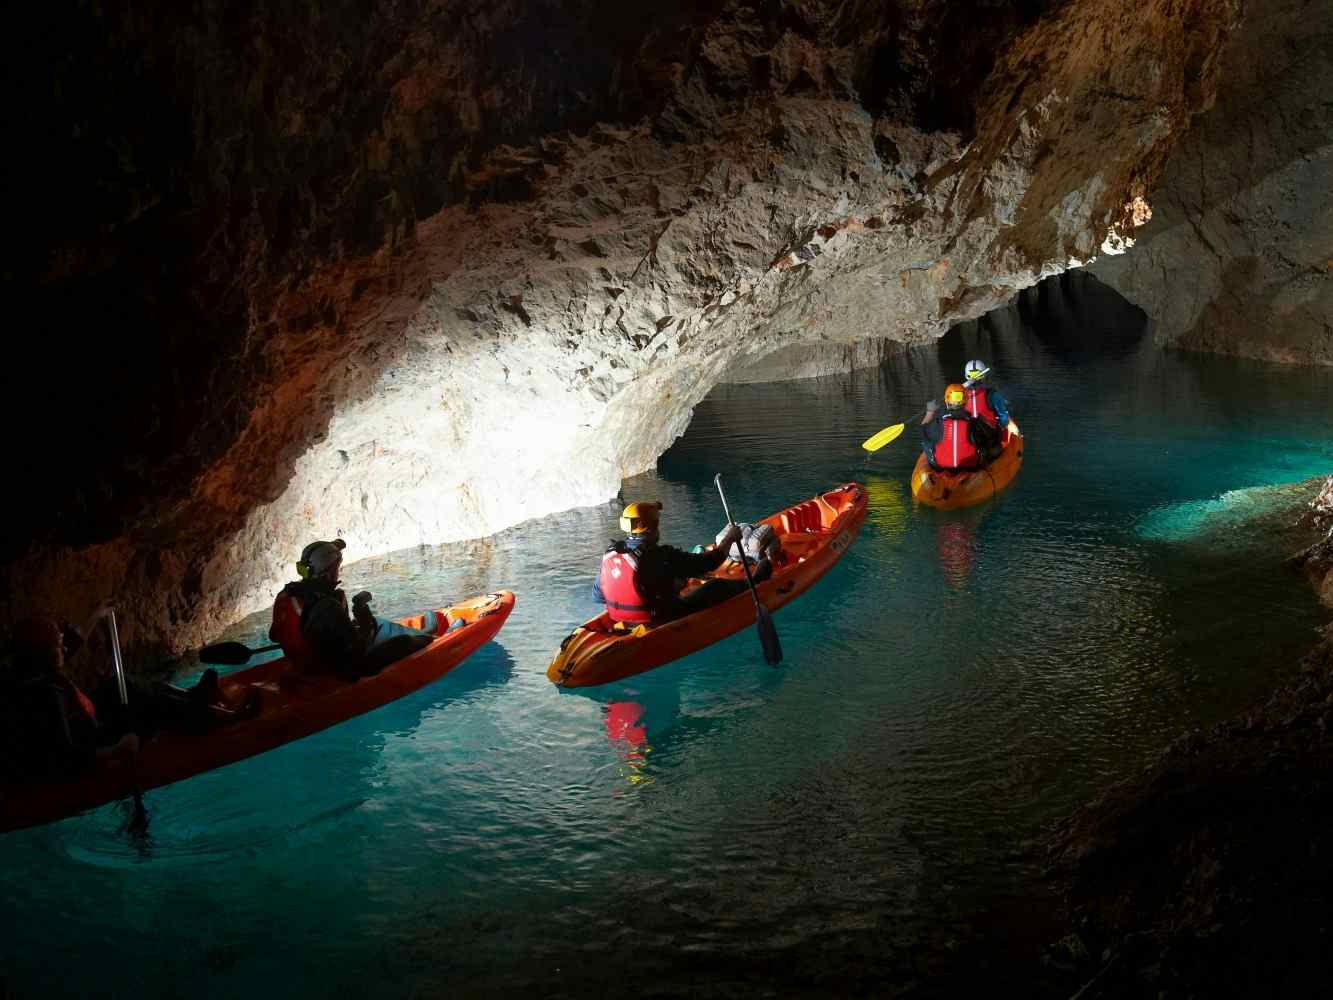 Kayaks in a dark cave lit by torches in Peca, Slovenia